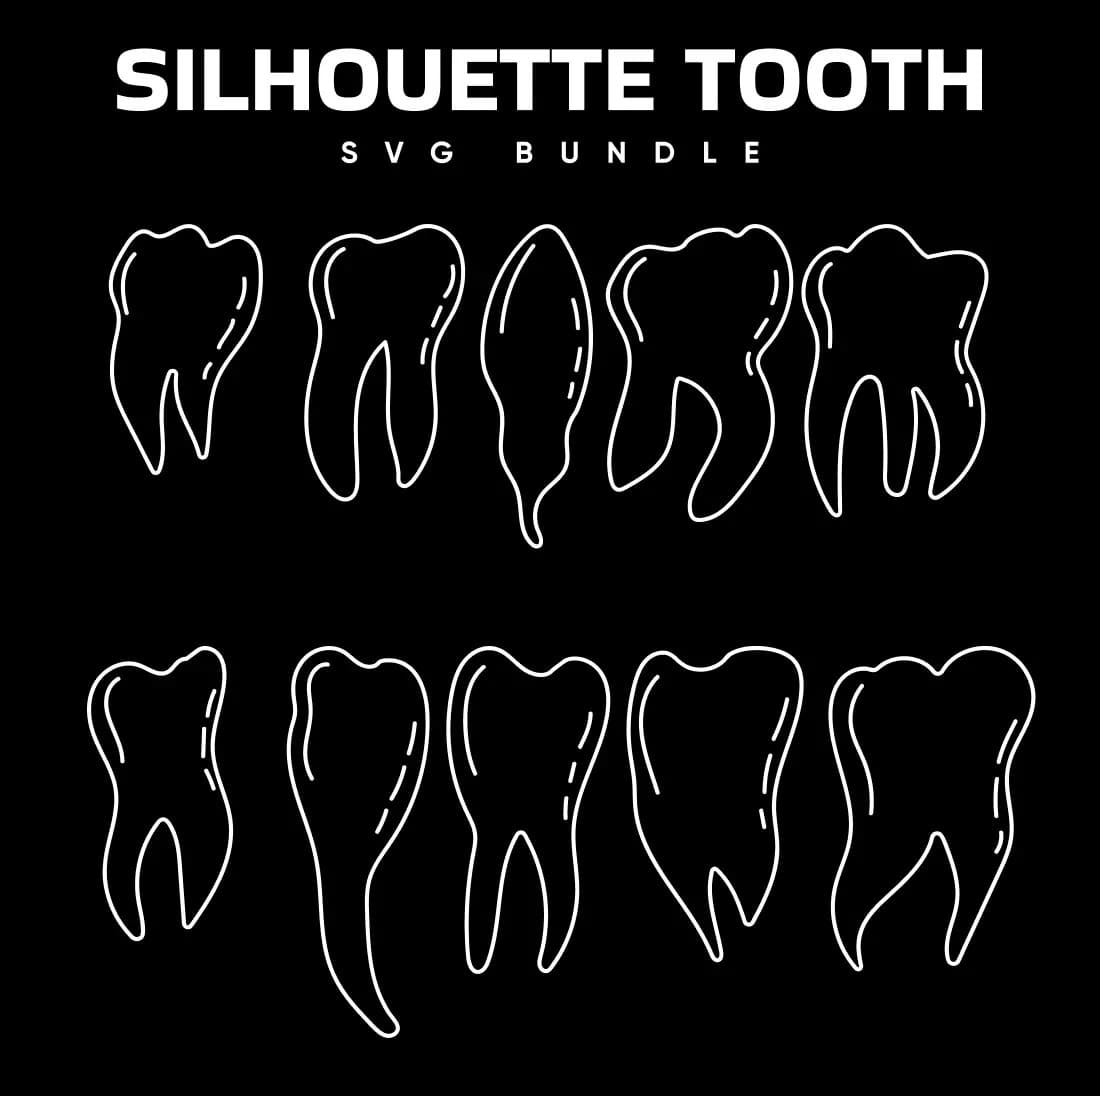 Silhouette Tooth SVG Bundle Preview.